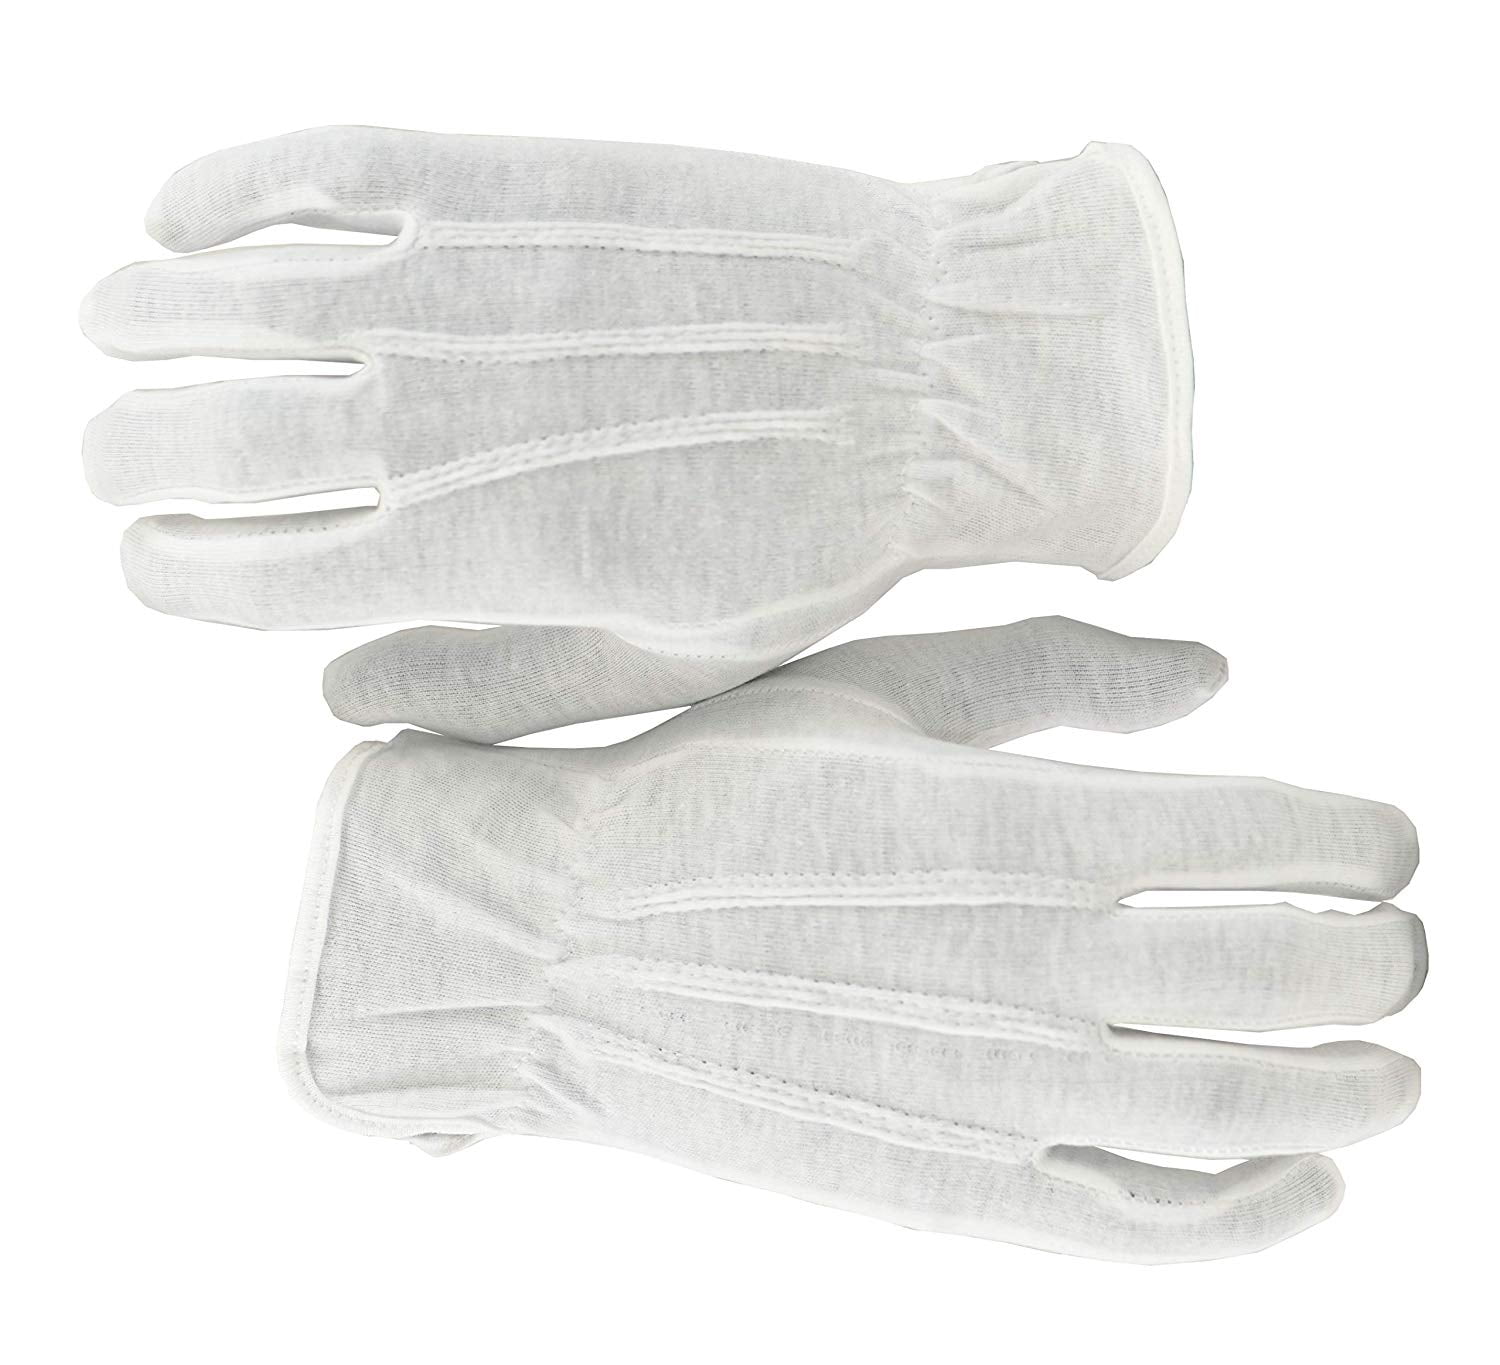 White Cotton Marching Band Formal Service and Inspection Gloves 1 Pair Medium 